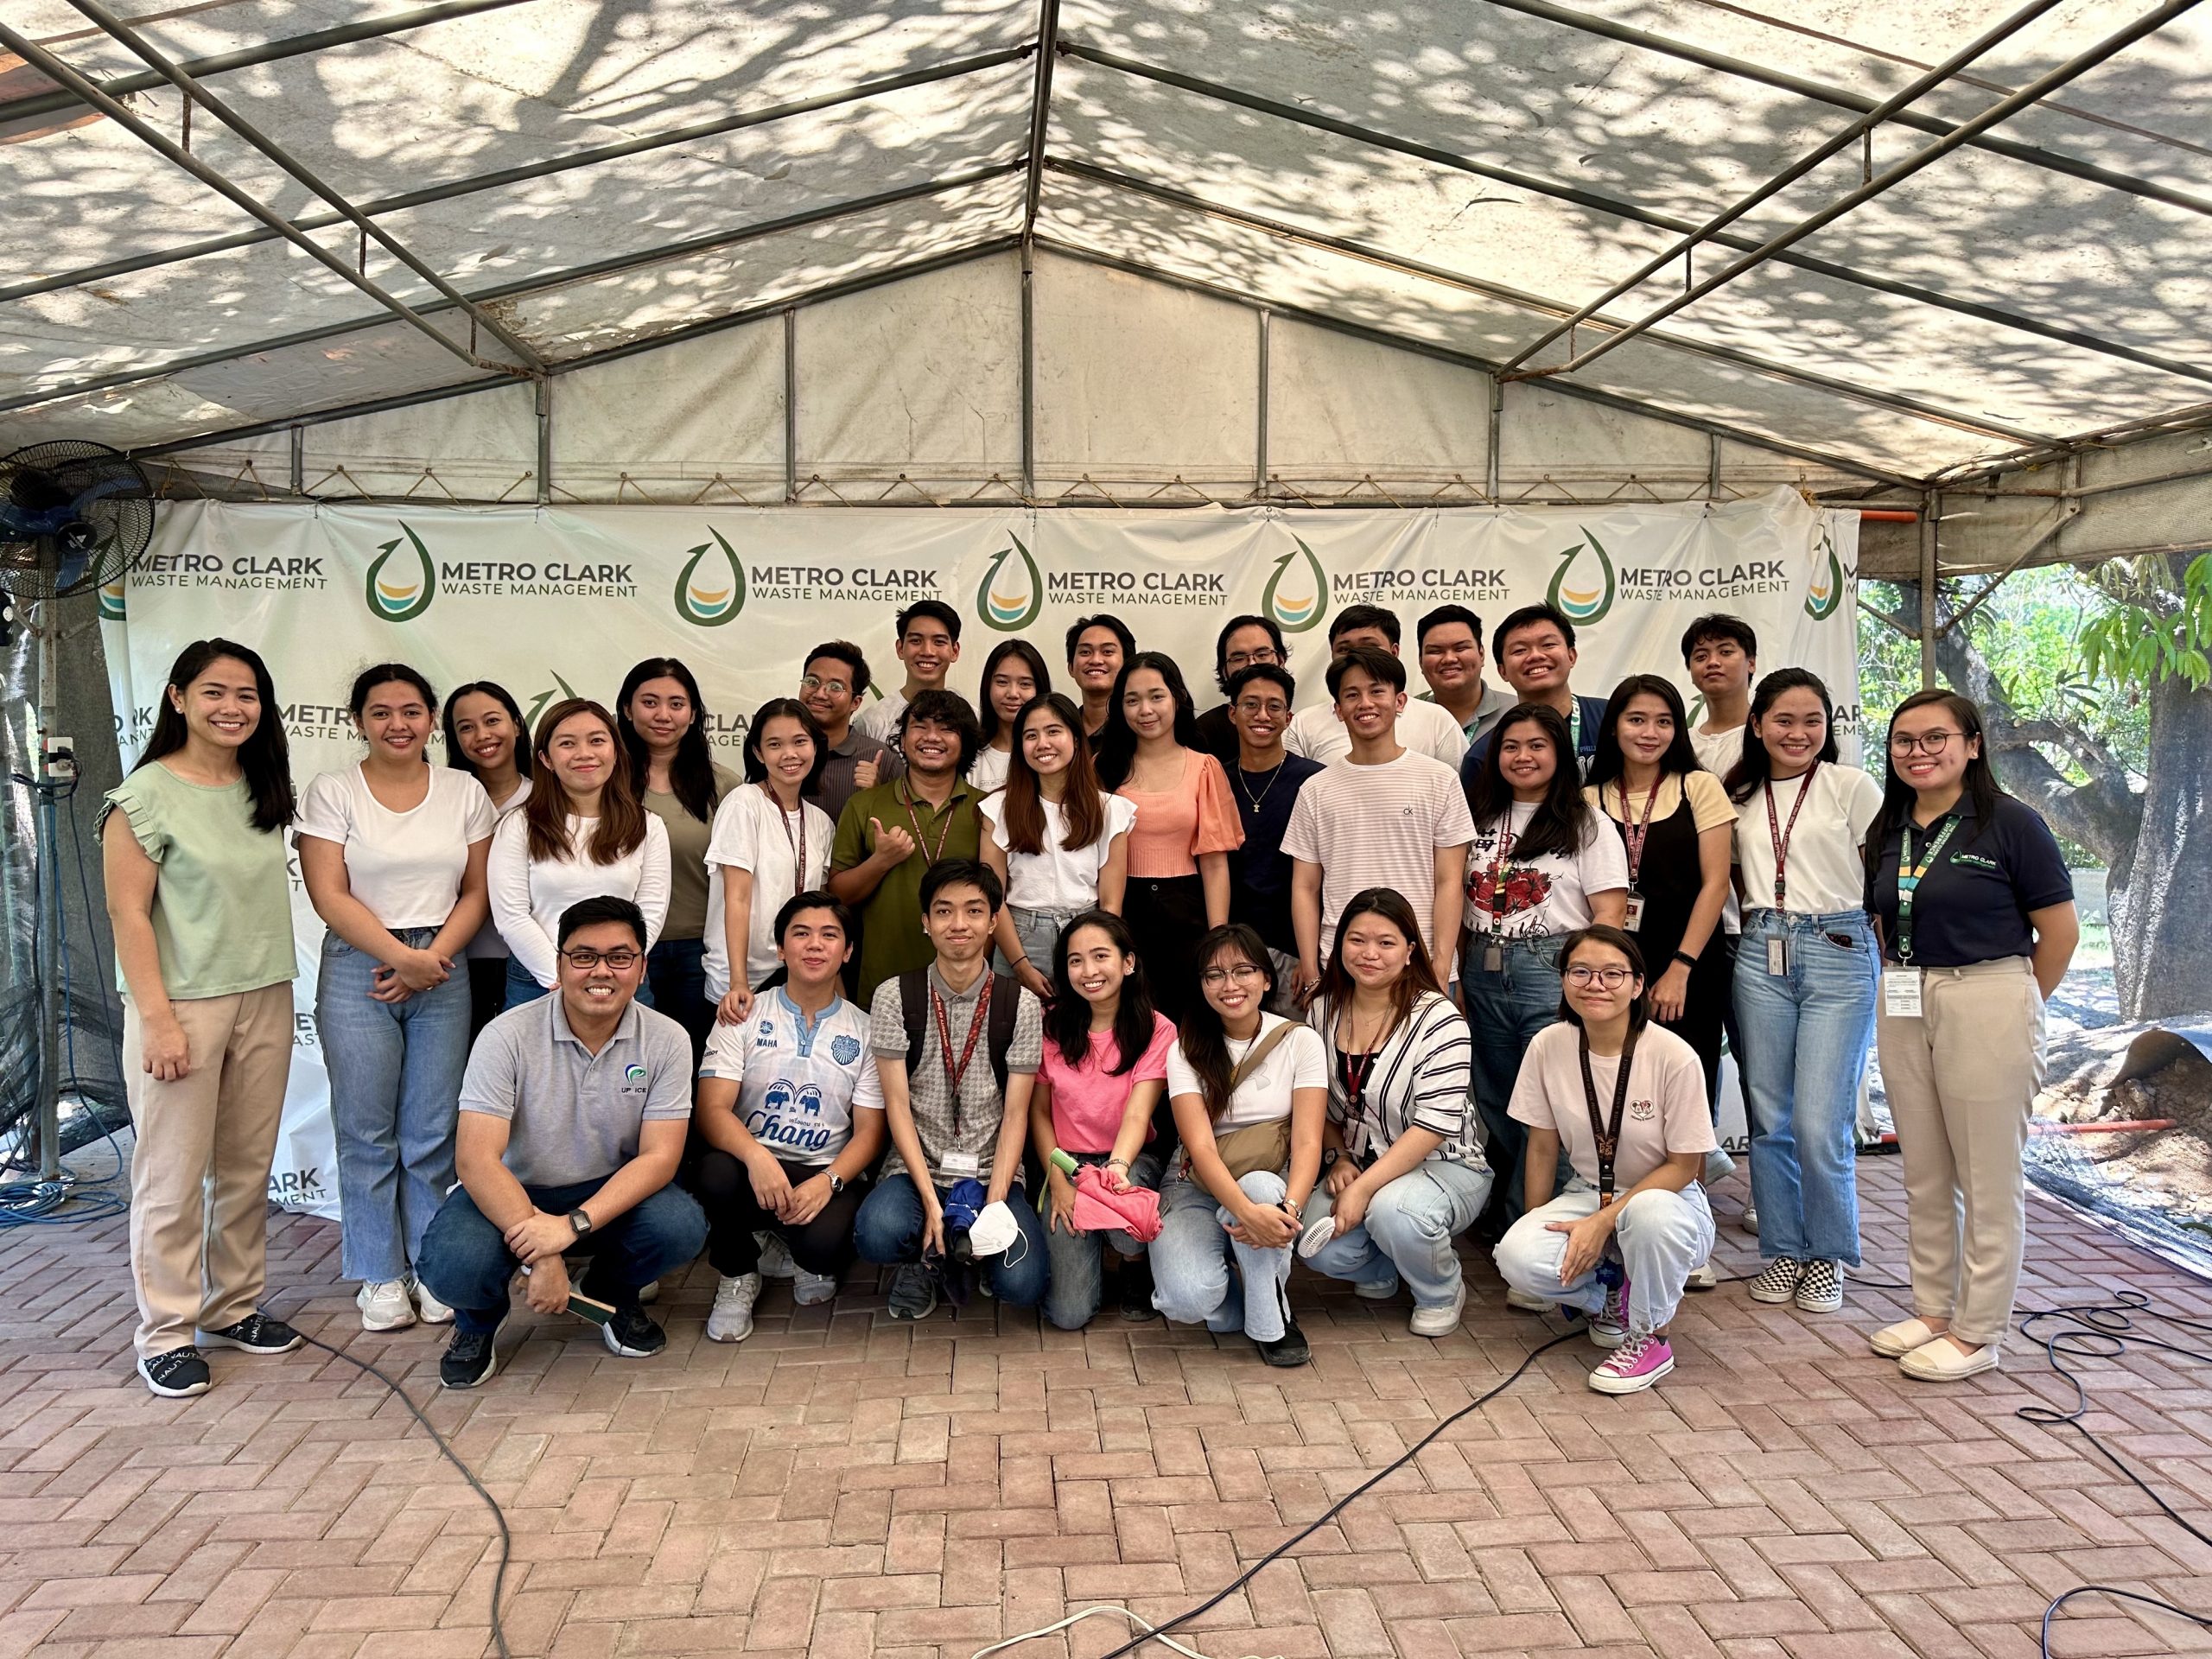 CE 197 and EnE 272 classes visit Metro Clark Waste Management Corp. Sanitary Landfill